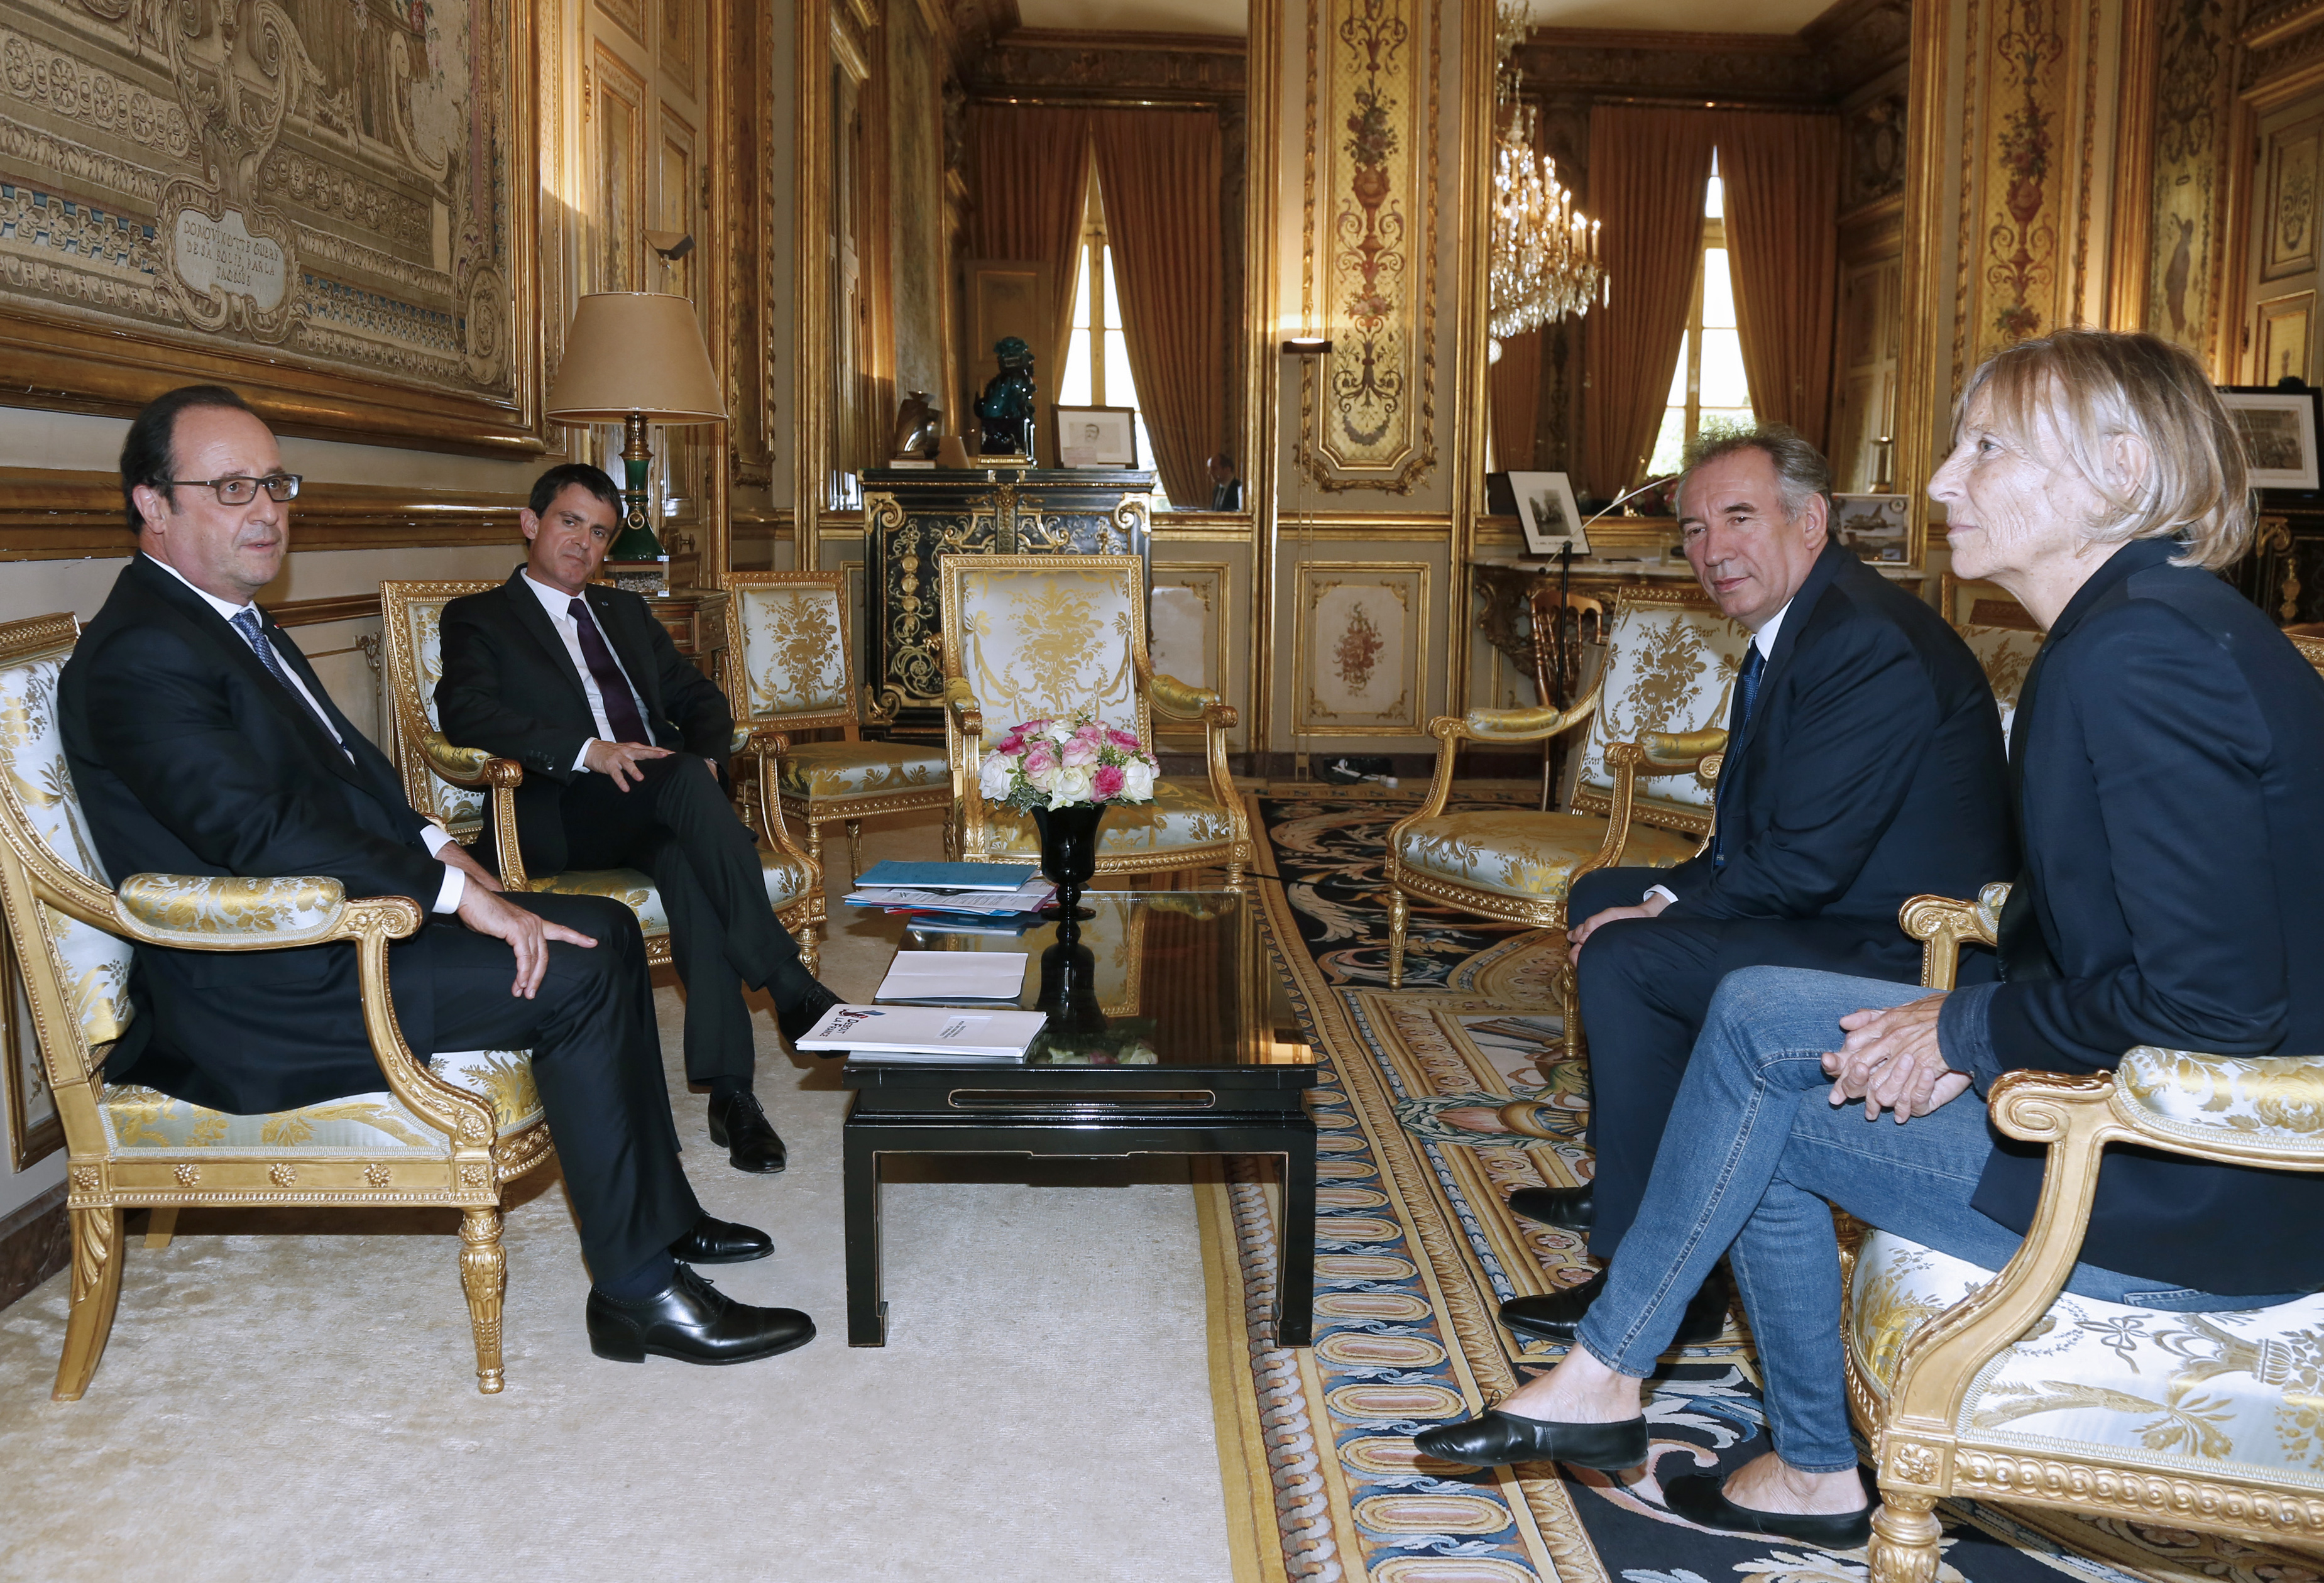 French President Francois Hollande (L) and Prime Minister Manuel Valls (2ndL) meet Francois Bayrou (2ndR), France's centrist MoDem party leader, and MoDem member Marielle de Sarnez (R) on June 25, 2016 at the Elysee Palace in Paris, after Britain's vote to leave the European Union. Europe's press was awash with gloom and doom over Brexit on June 25, warning that it was a boon for nationalists while urging EU leaders to meet the challenge of their "rendezvous with history". / AFP PHOTO / POOL / JACKY NAEGELEN